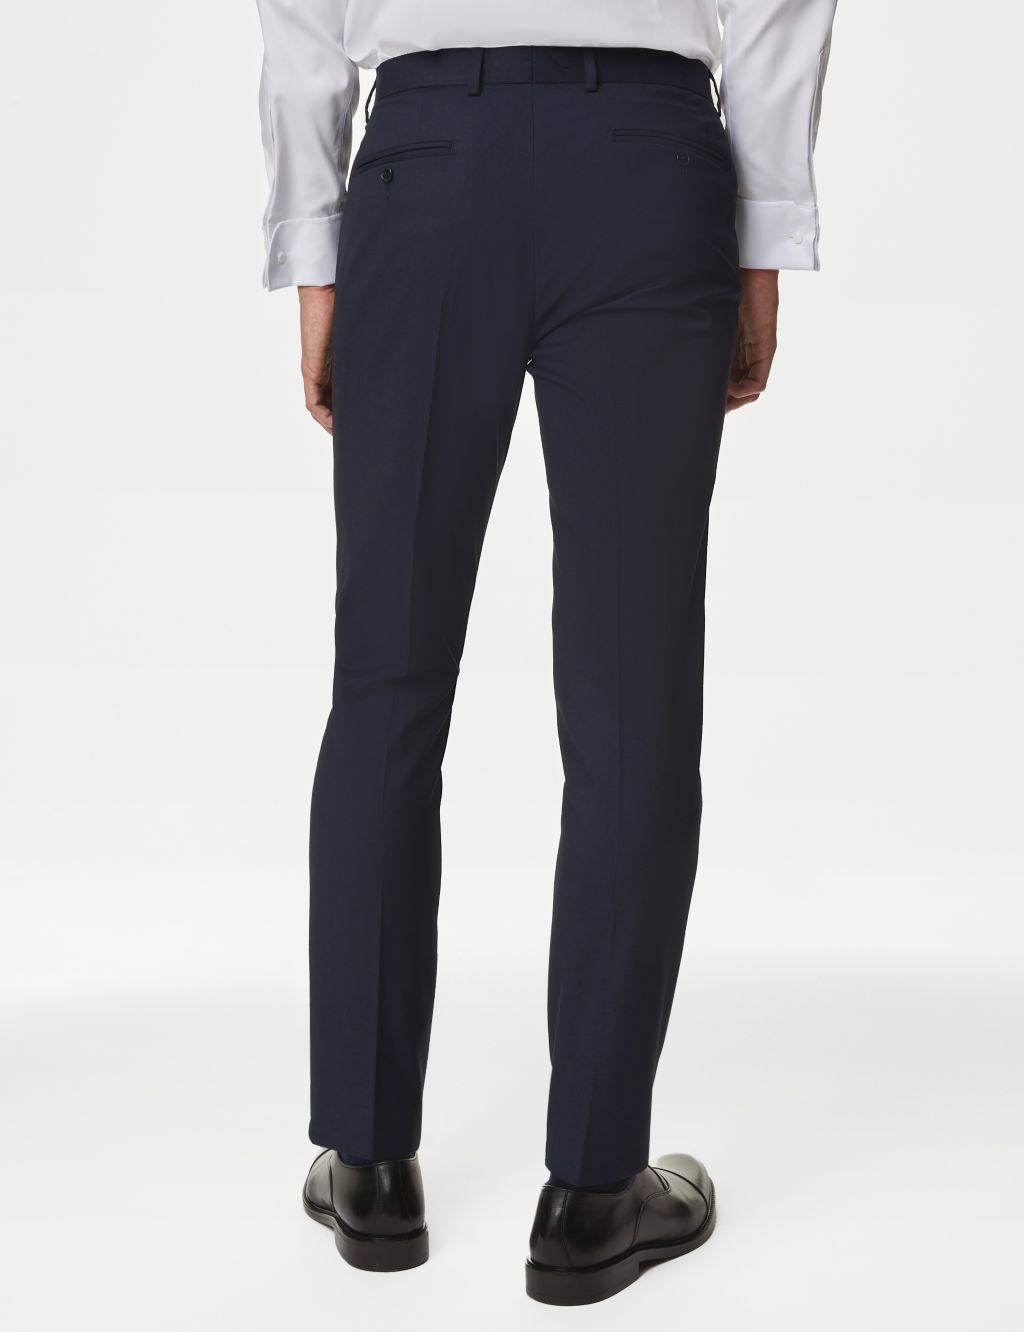 Skinny Fit Stretch Suit Trousers image 4